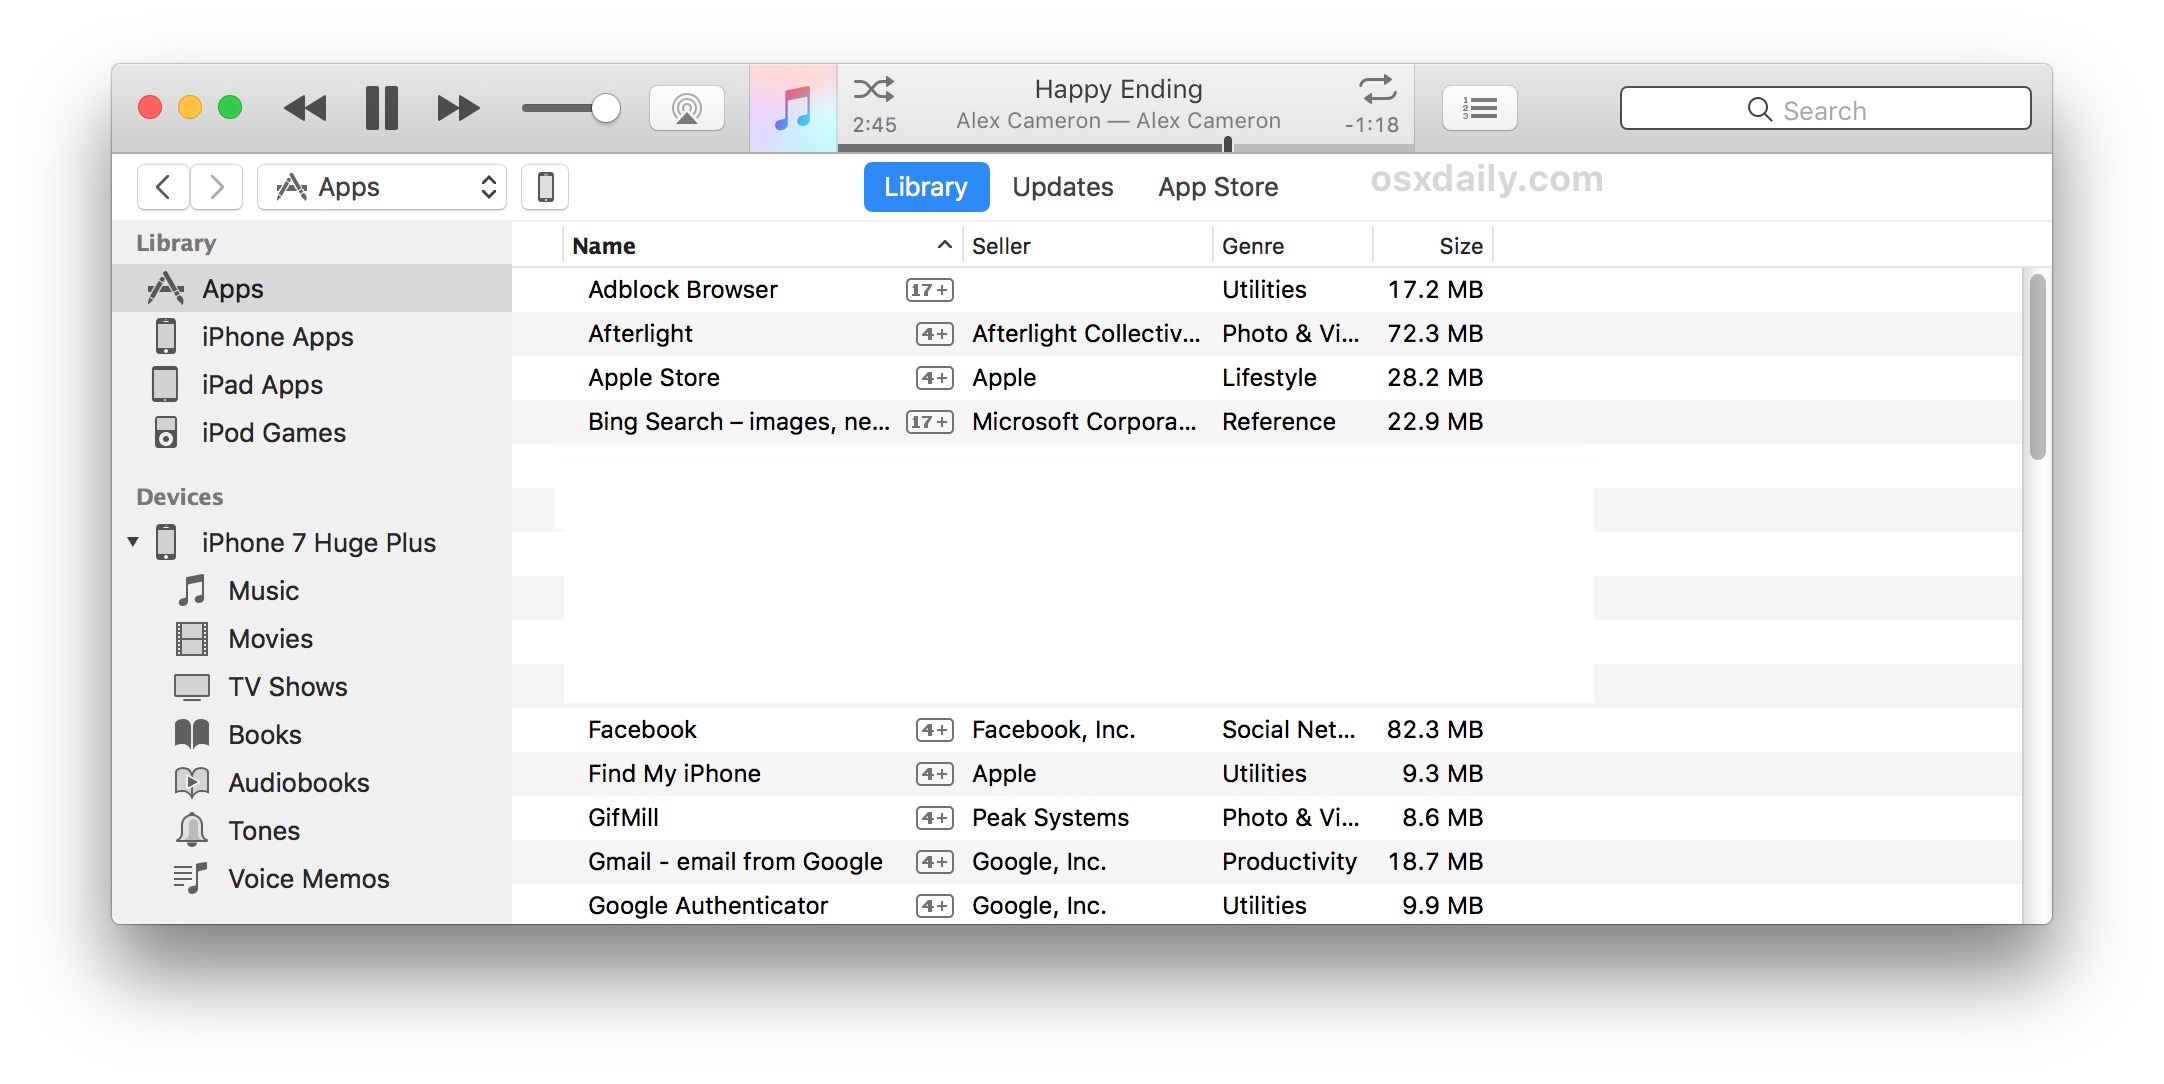 Download itunes 12.6.5.3 fro mac os